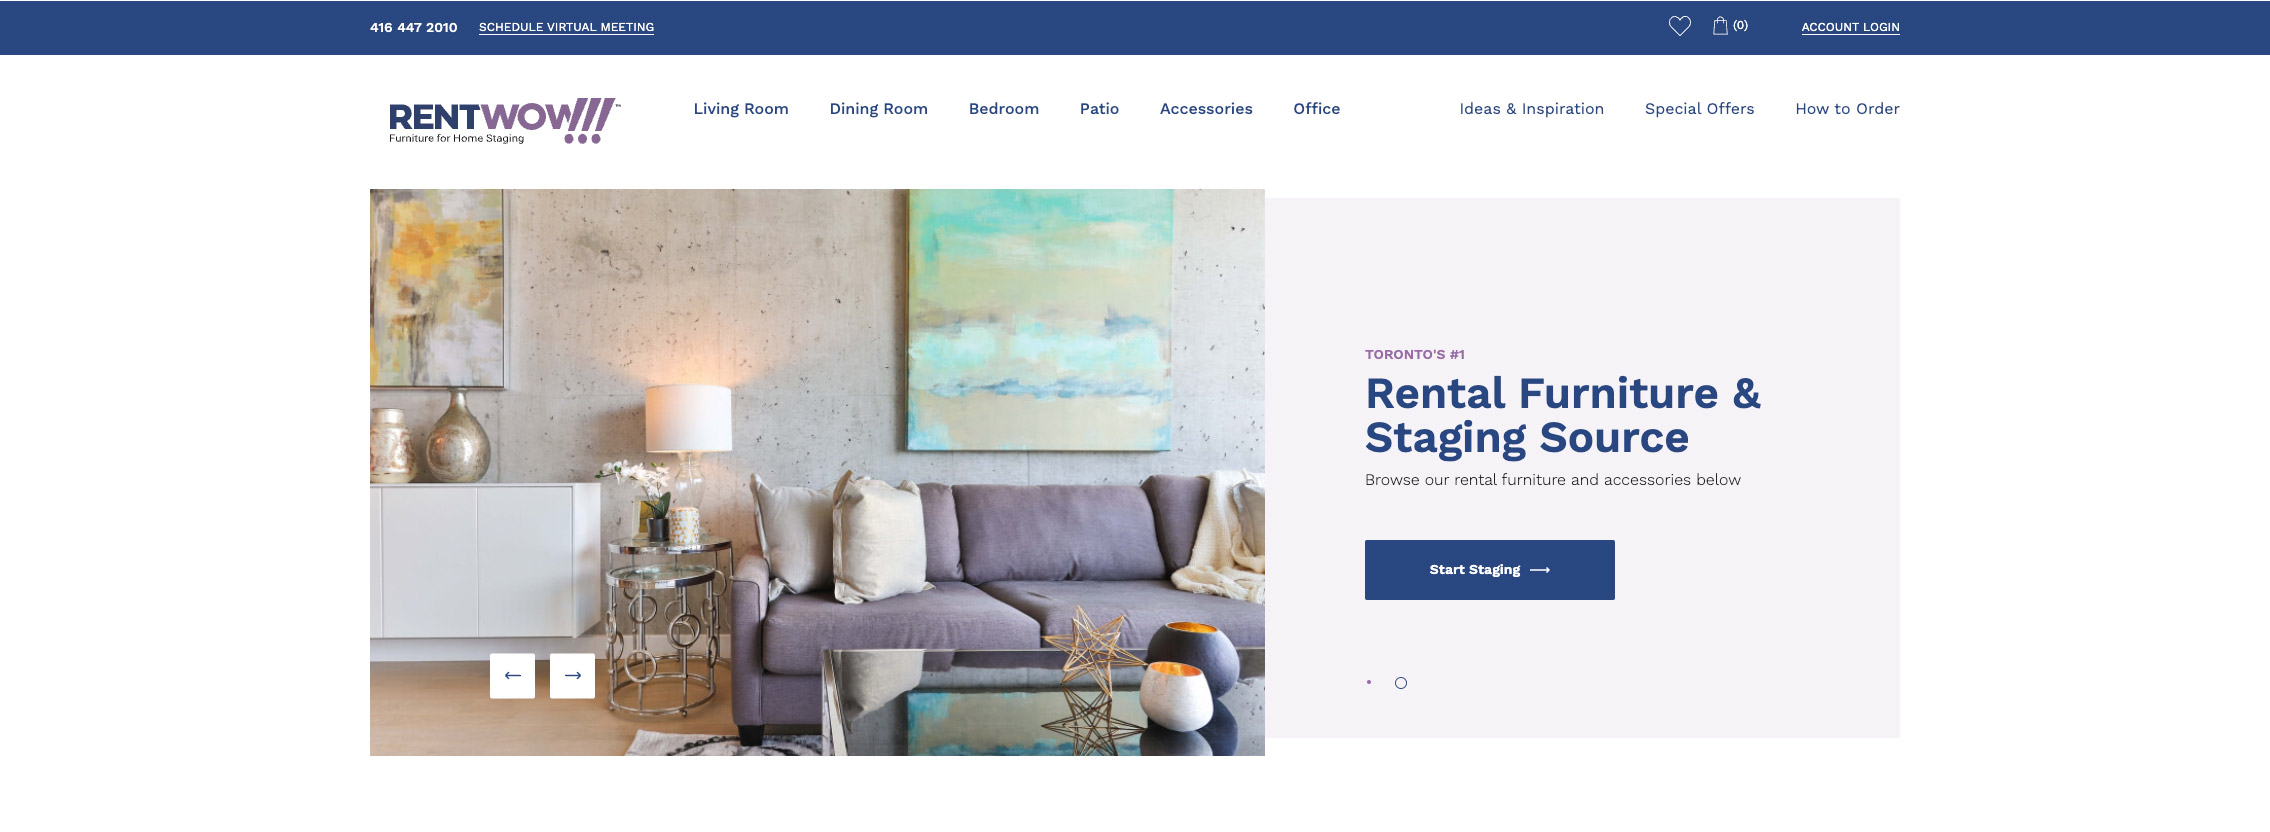 New and improved Rent WOW!!! Website